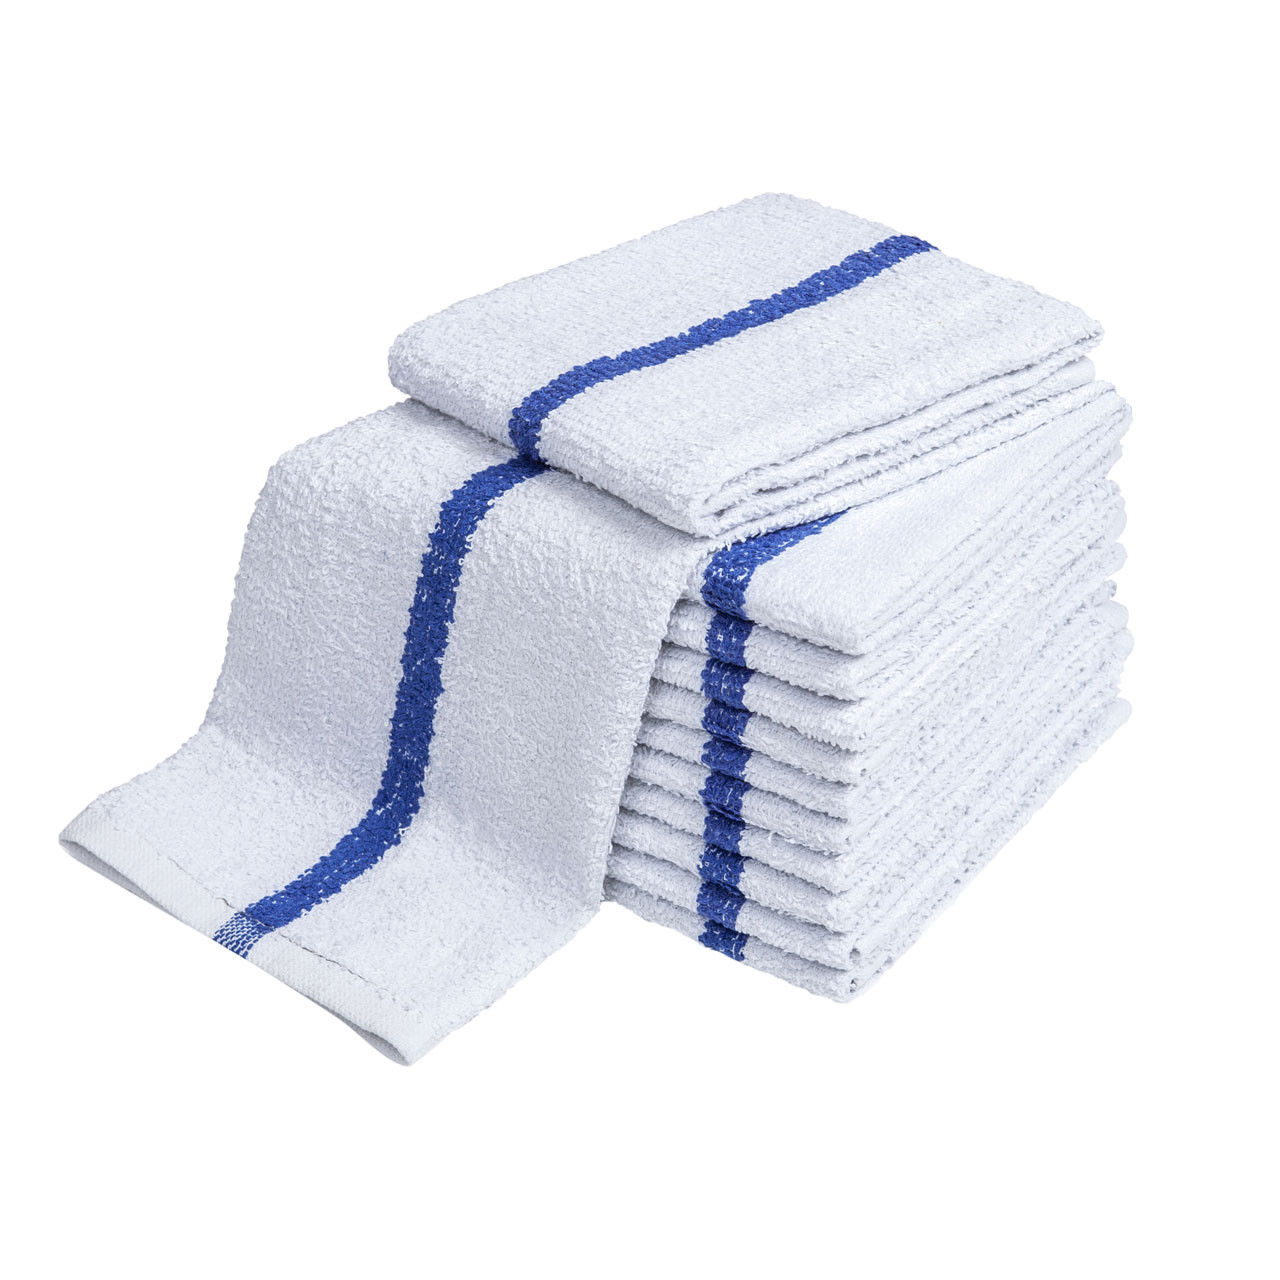 What style do these ADI bar towels with center stripe come in?